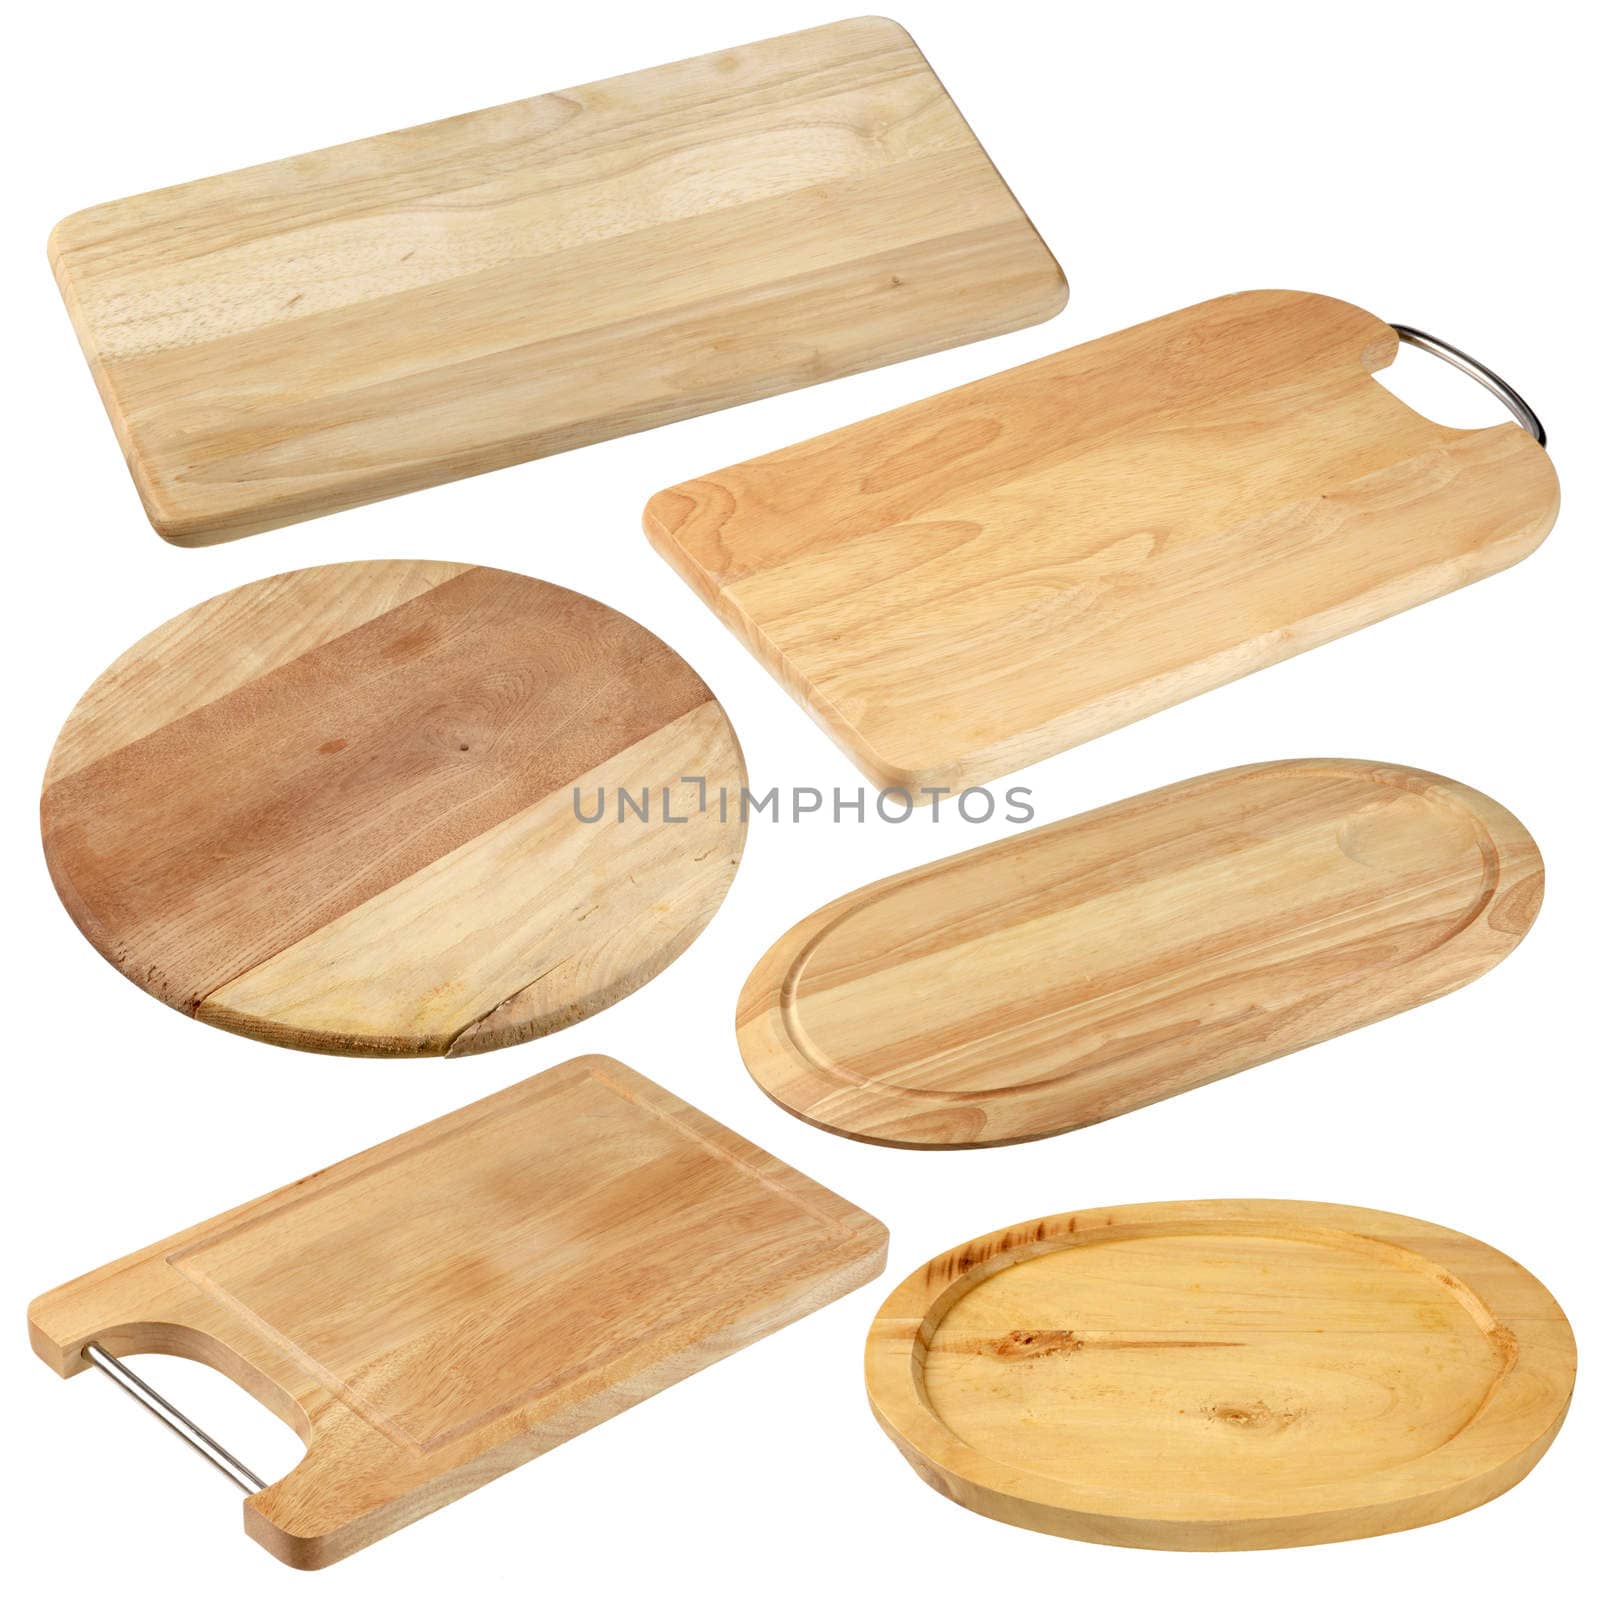 Various wooden cutting boards by Digifoodstock